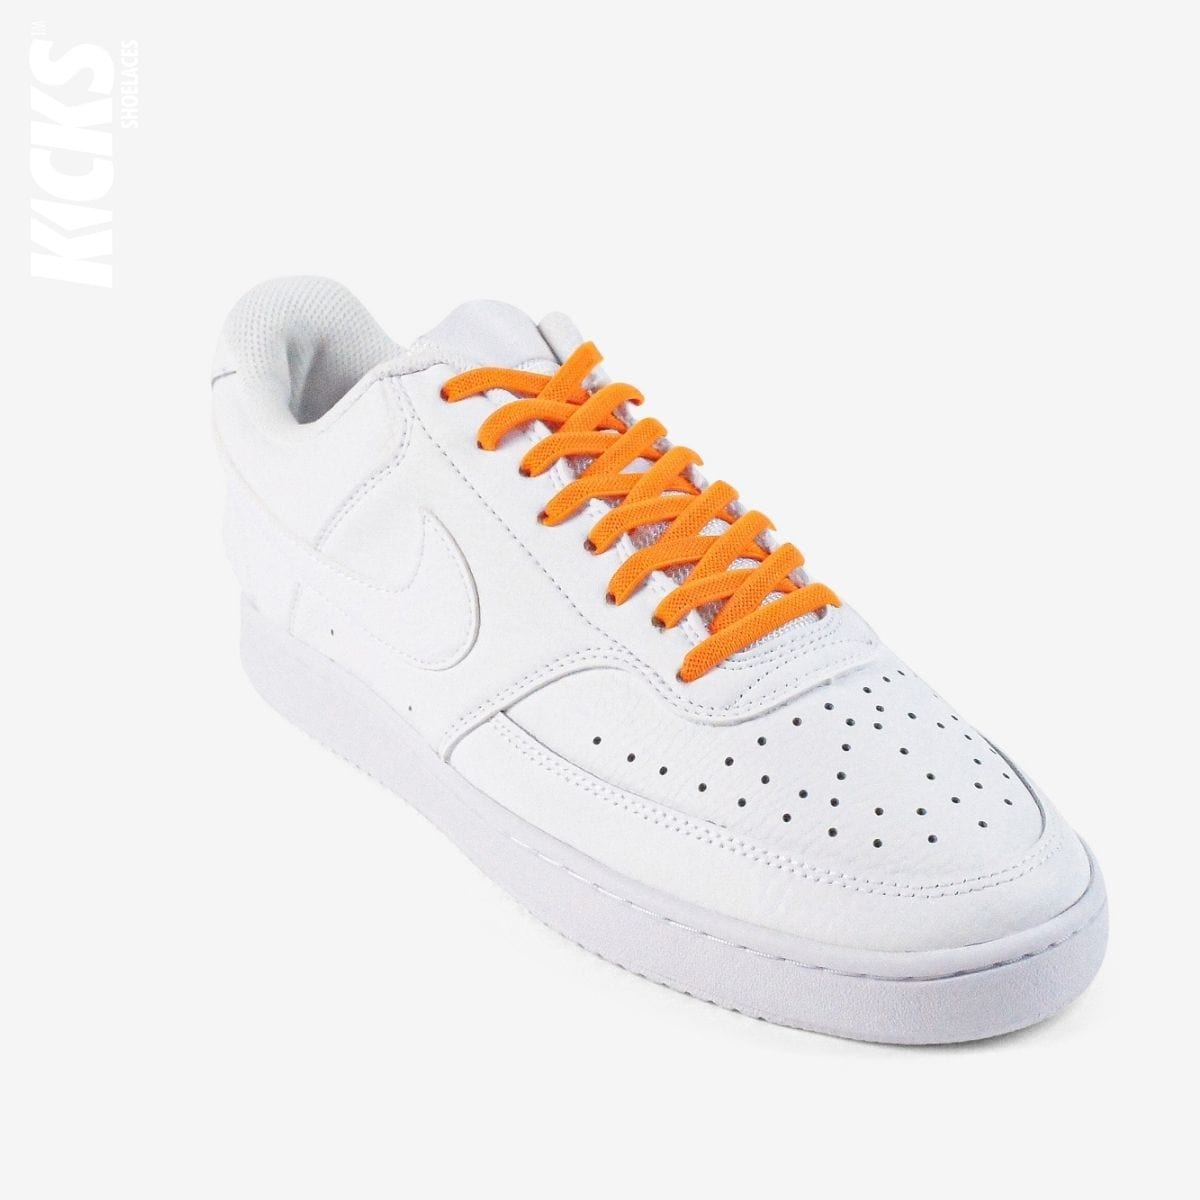 no-tie-shoelaces-with-orange-laces-on-nike-white-sneakers-by-kicks-shoelaces